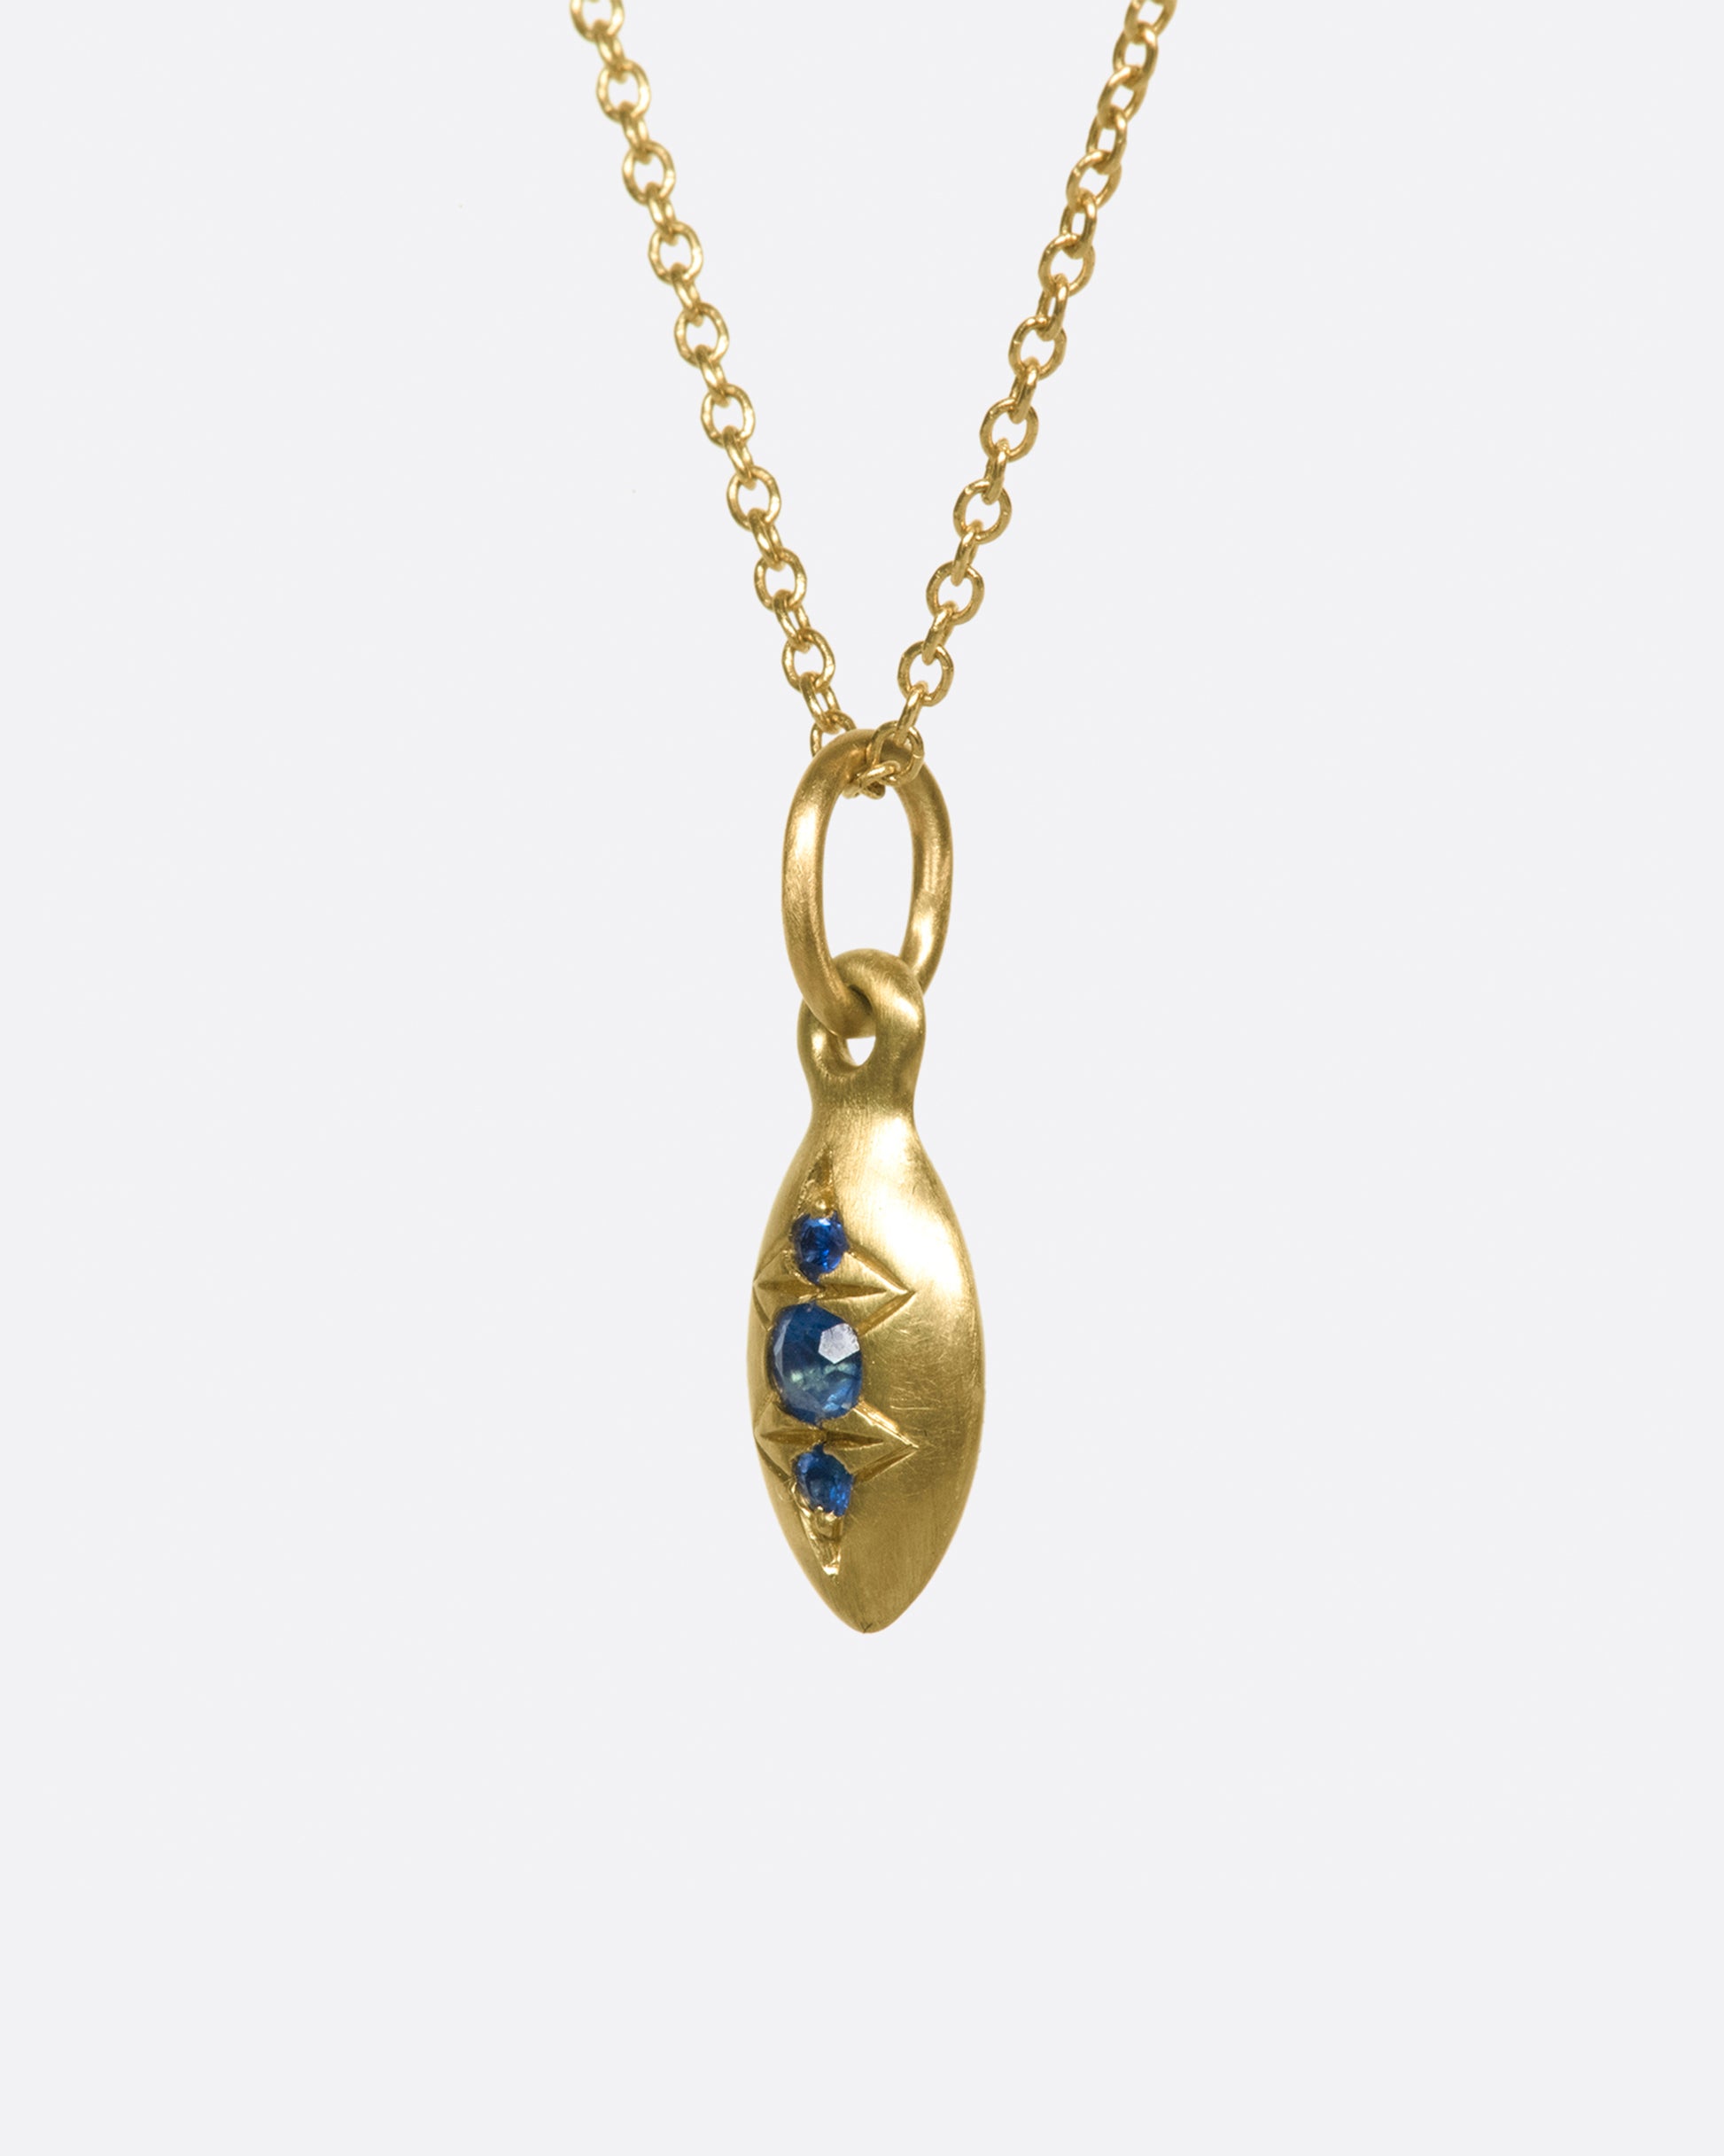 A seed-shaped, brushed gold pendant necklace with three vibrant blue sapphires.